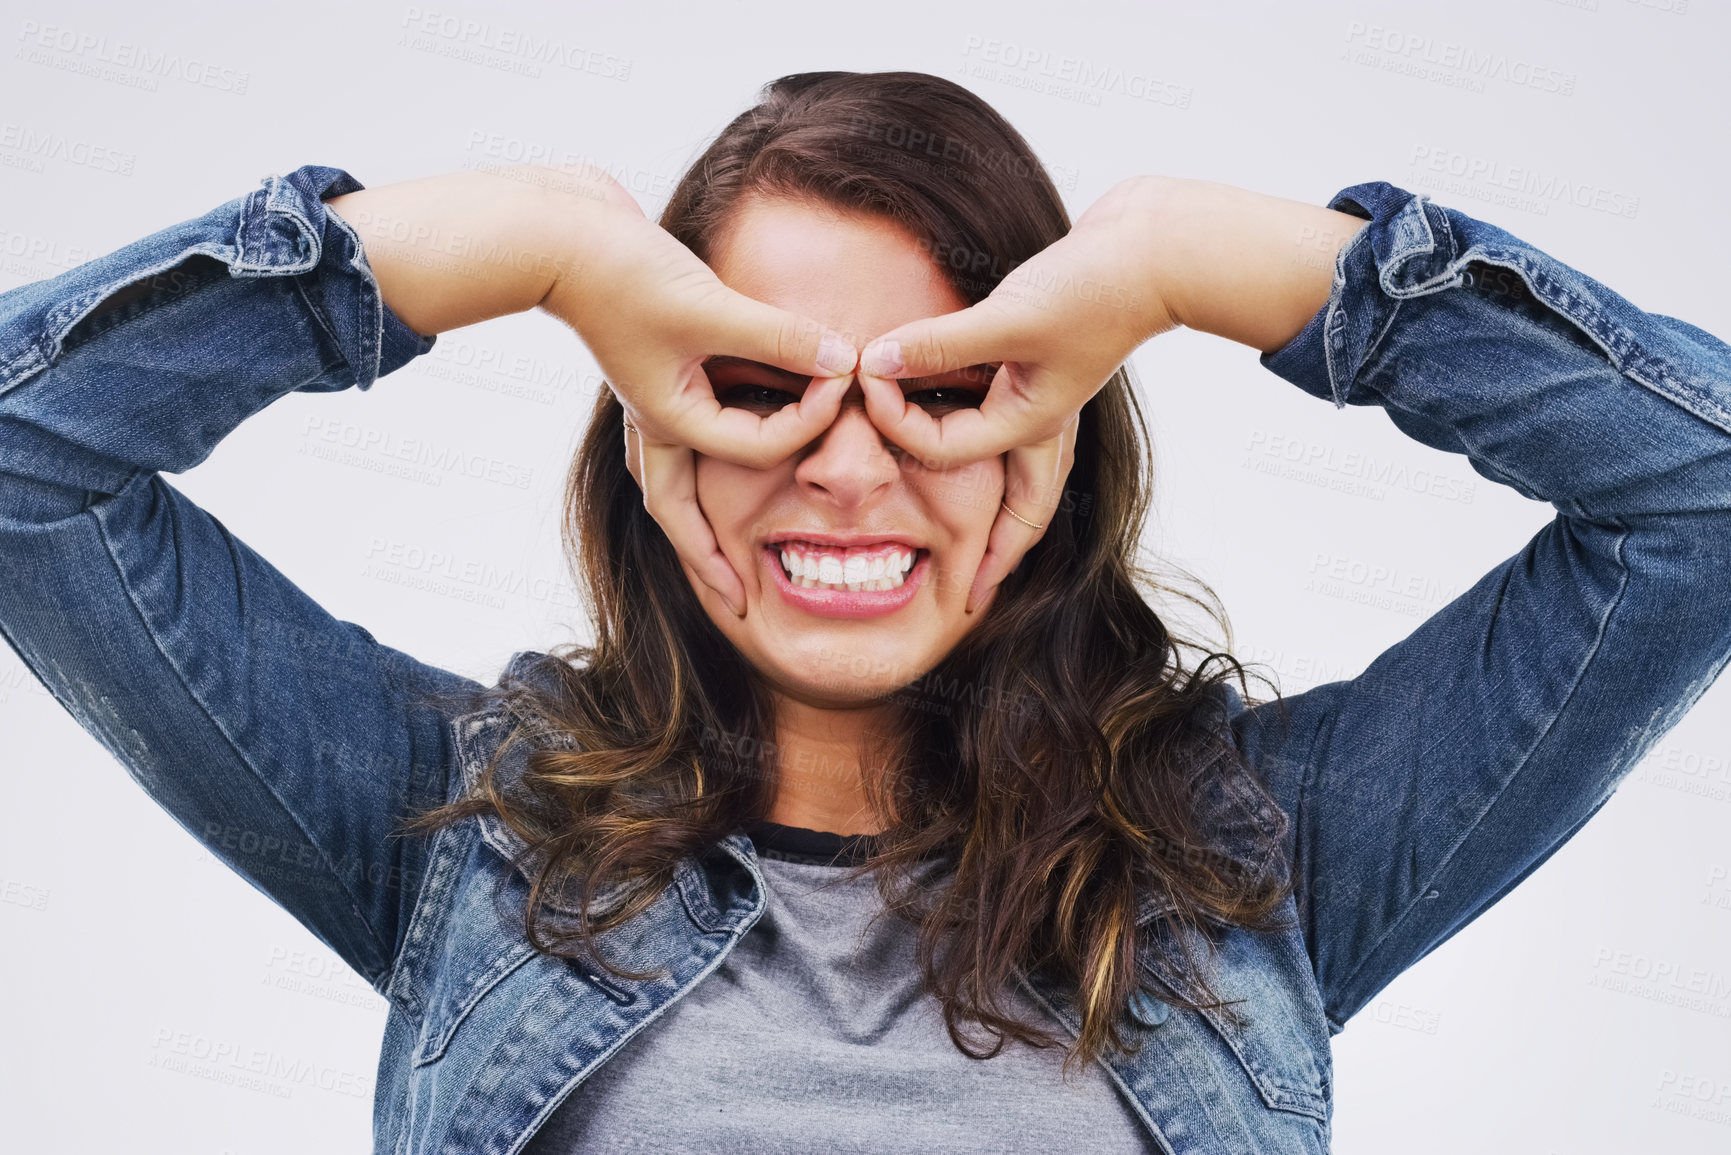 Buy stock photo Portrait, funny face and finger glasses with a woman in studio on a white background looking silly or goofy. Comedy, comic and smile with a crazy young female person joking indoor for fun or humor